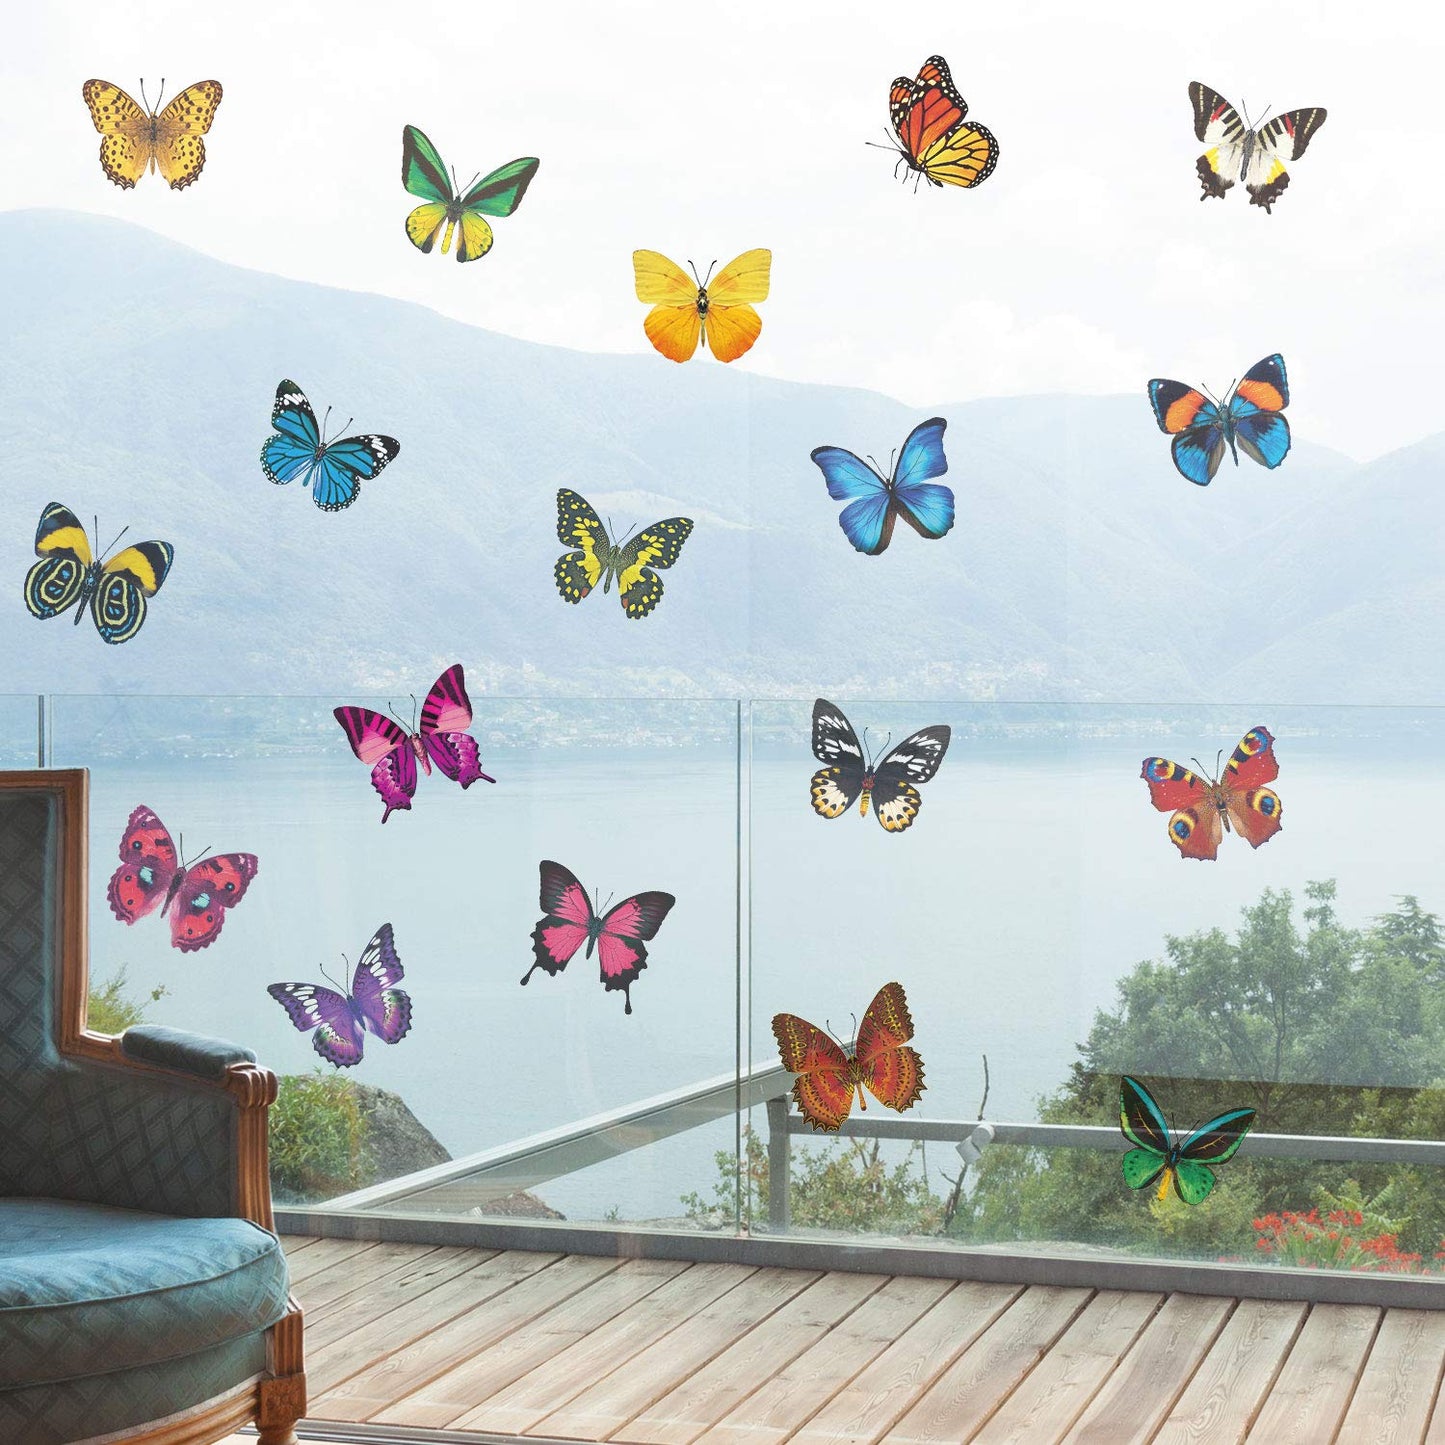 40 Pieces Butterfly Anti-Collision Window Clings Birds Window Decals to Prevent People and Bird Strikes on Window Glass Cling Decor for Windows and Doors